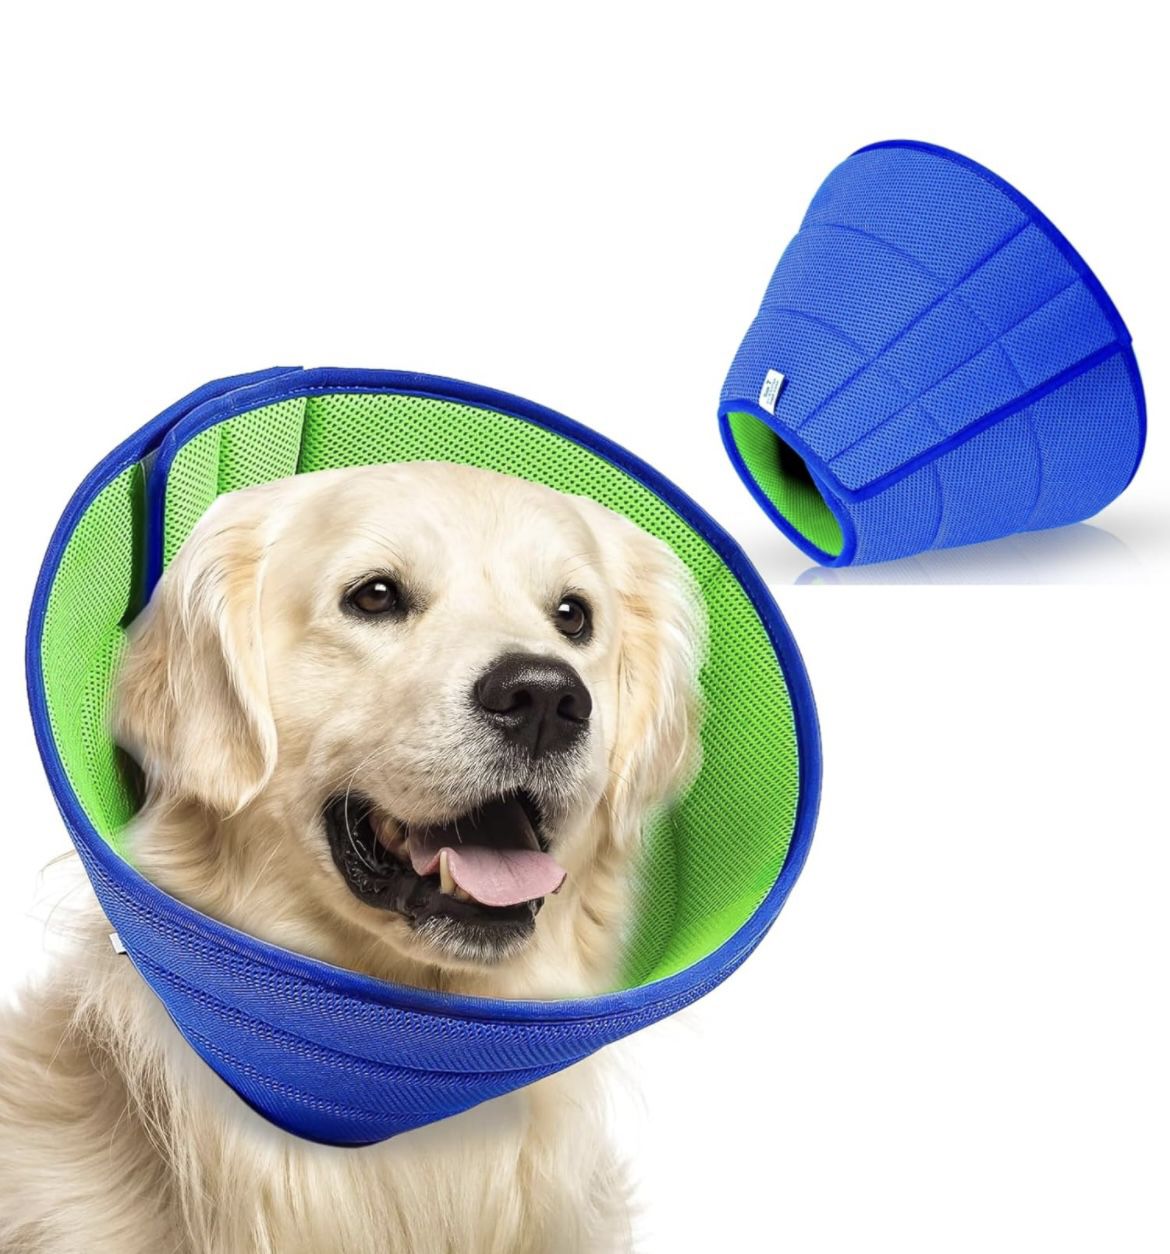 Dog Cone Collar, Pet Recovery Soft Cone Callar for Dogs for After Surgery Prevent Biting Licking Scratching Touching, Size L